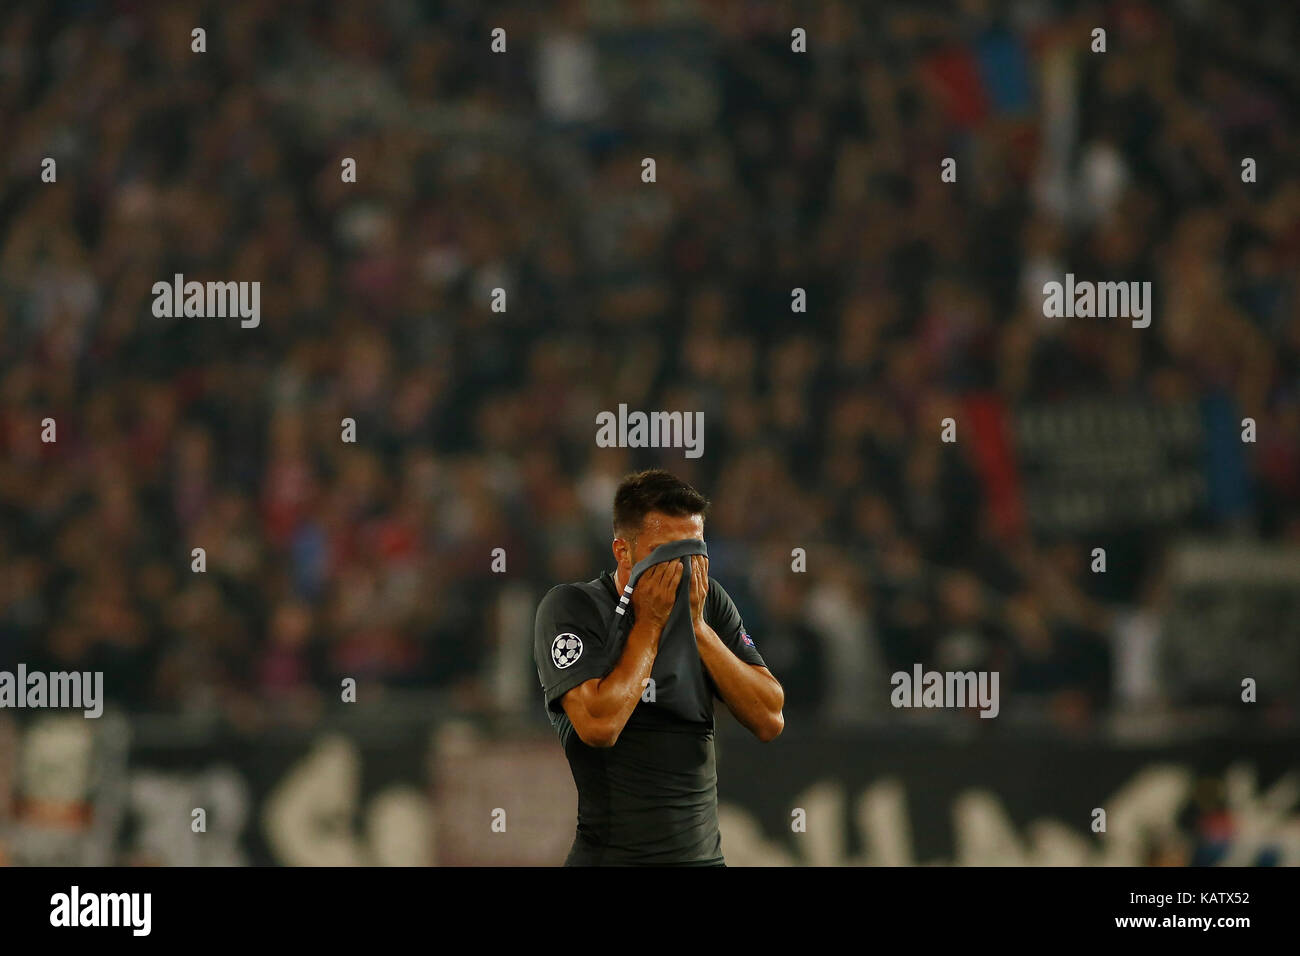 Basel, Switzerland. 27th Sep, 2017. Benfica's Andreas Samaris reacts after the UEFA Champions League group A match between Basel and Benfica in Basel, Switzerland, on Sept. 27, 2017. Basel won 5-0. Credit: Michele Limina/Xinhua/Alamy Live News Stock Photo